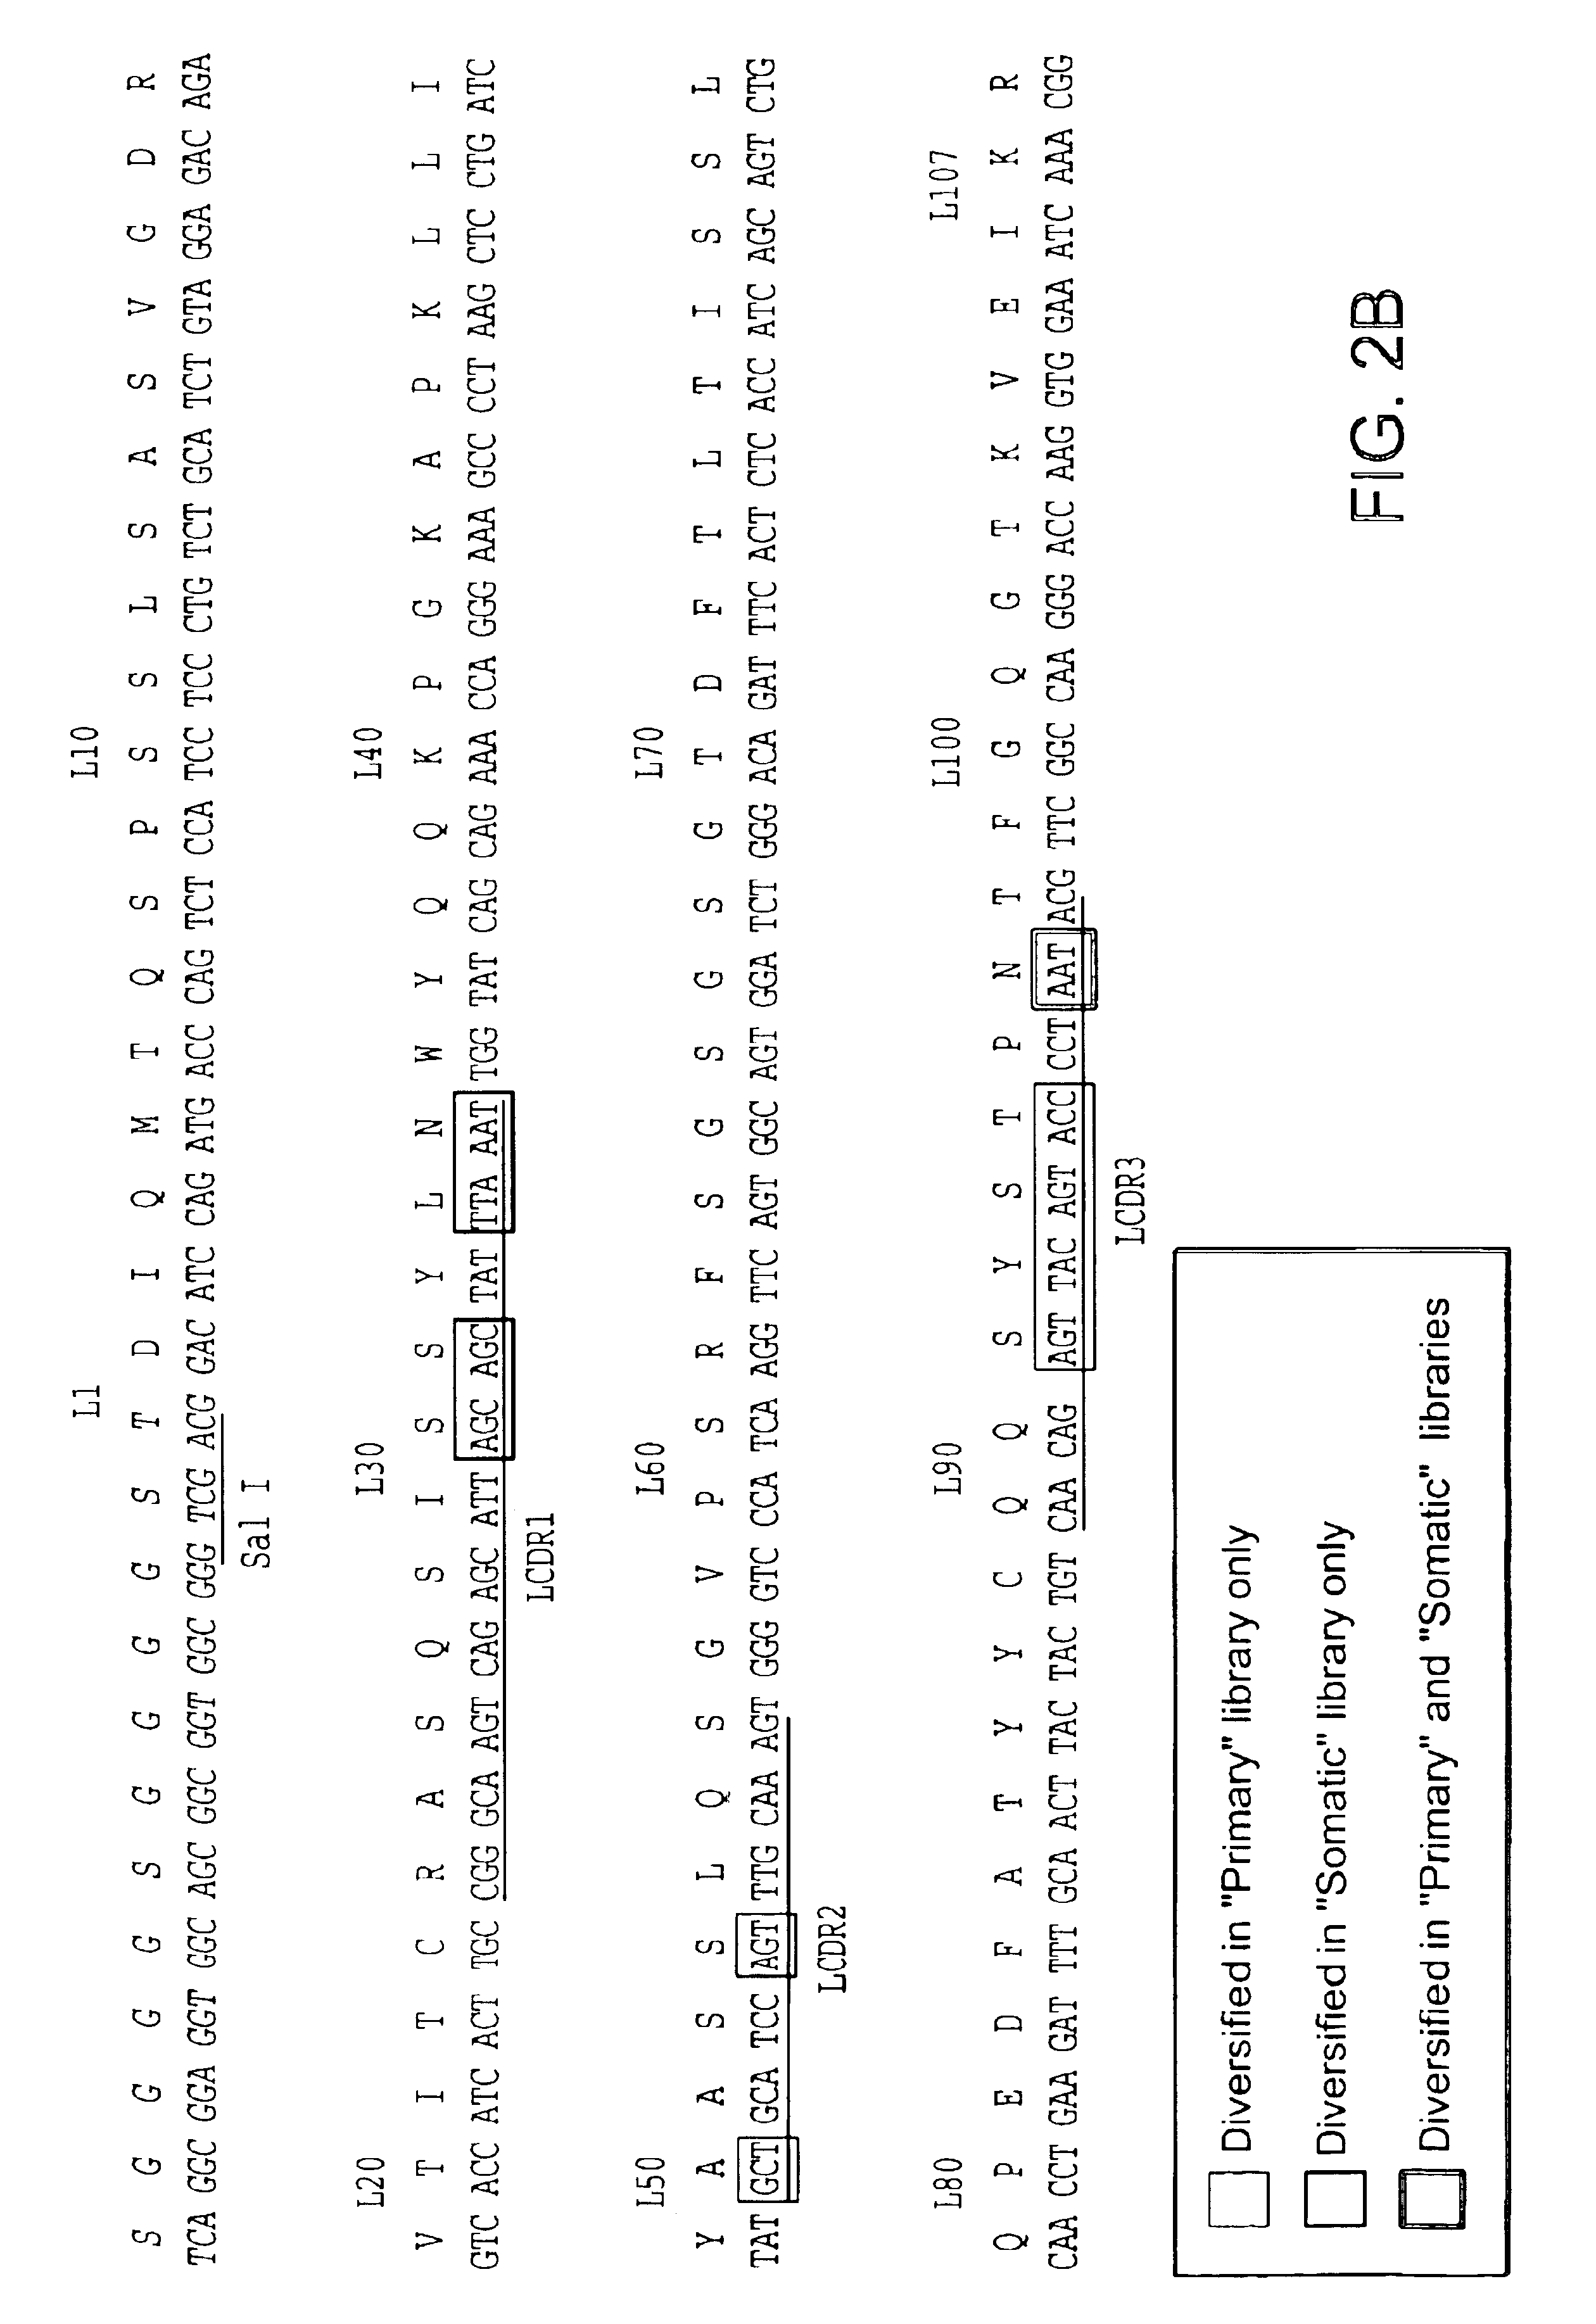 Method to screen phage display libraries with different ligands